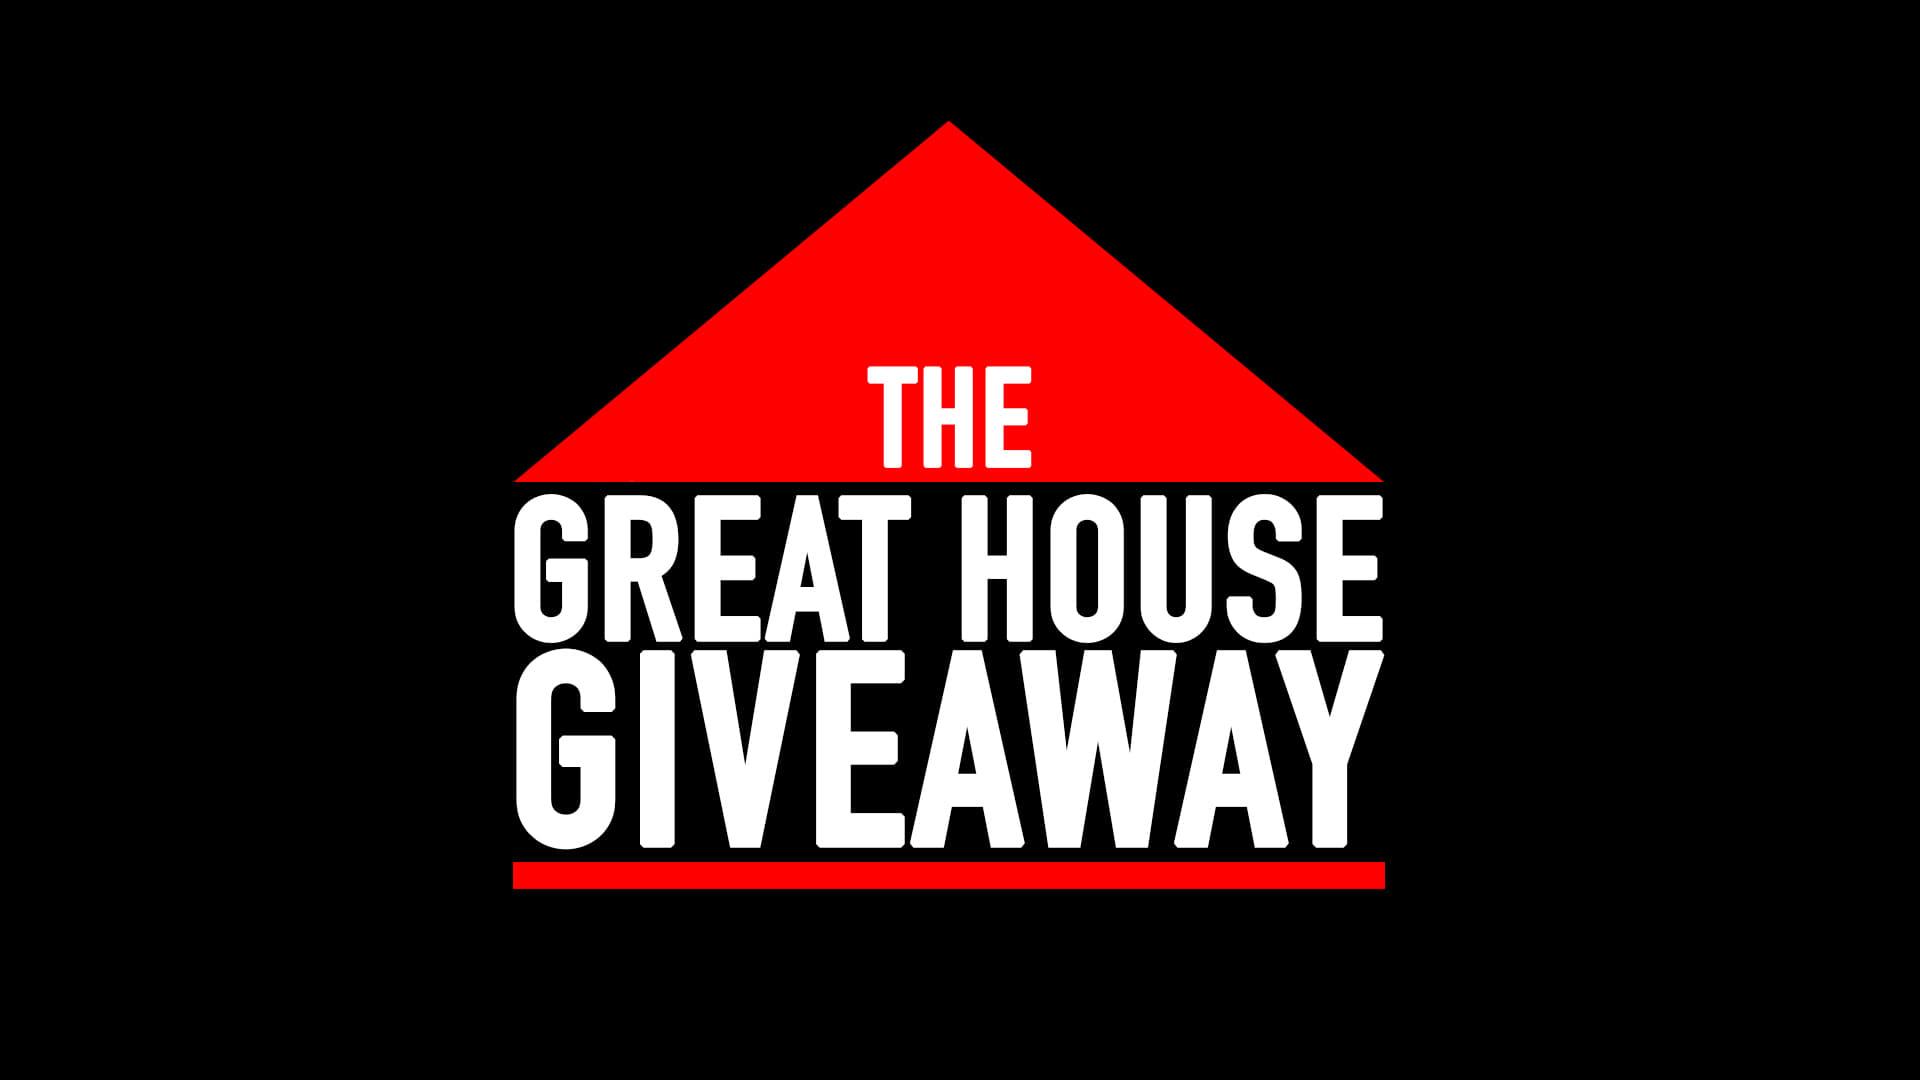 The Great House Giveaway backdrop